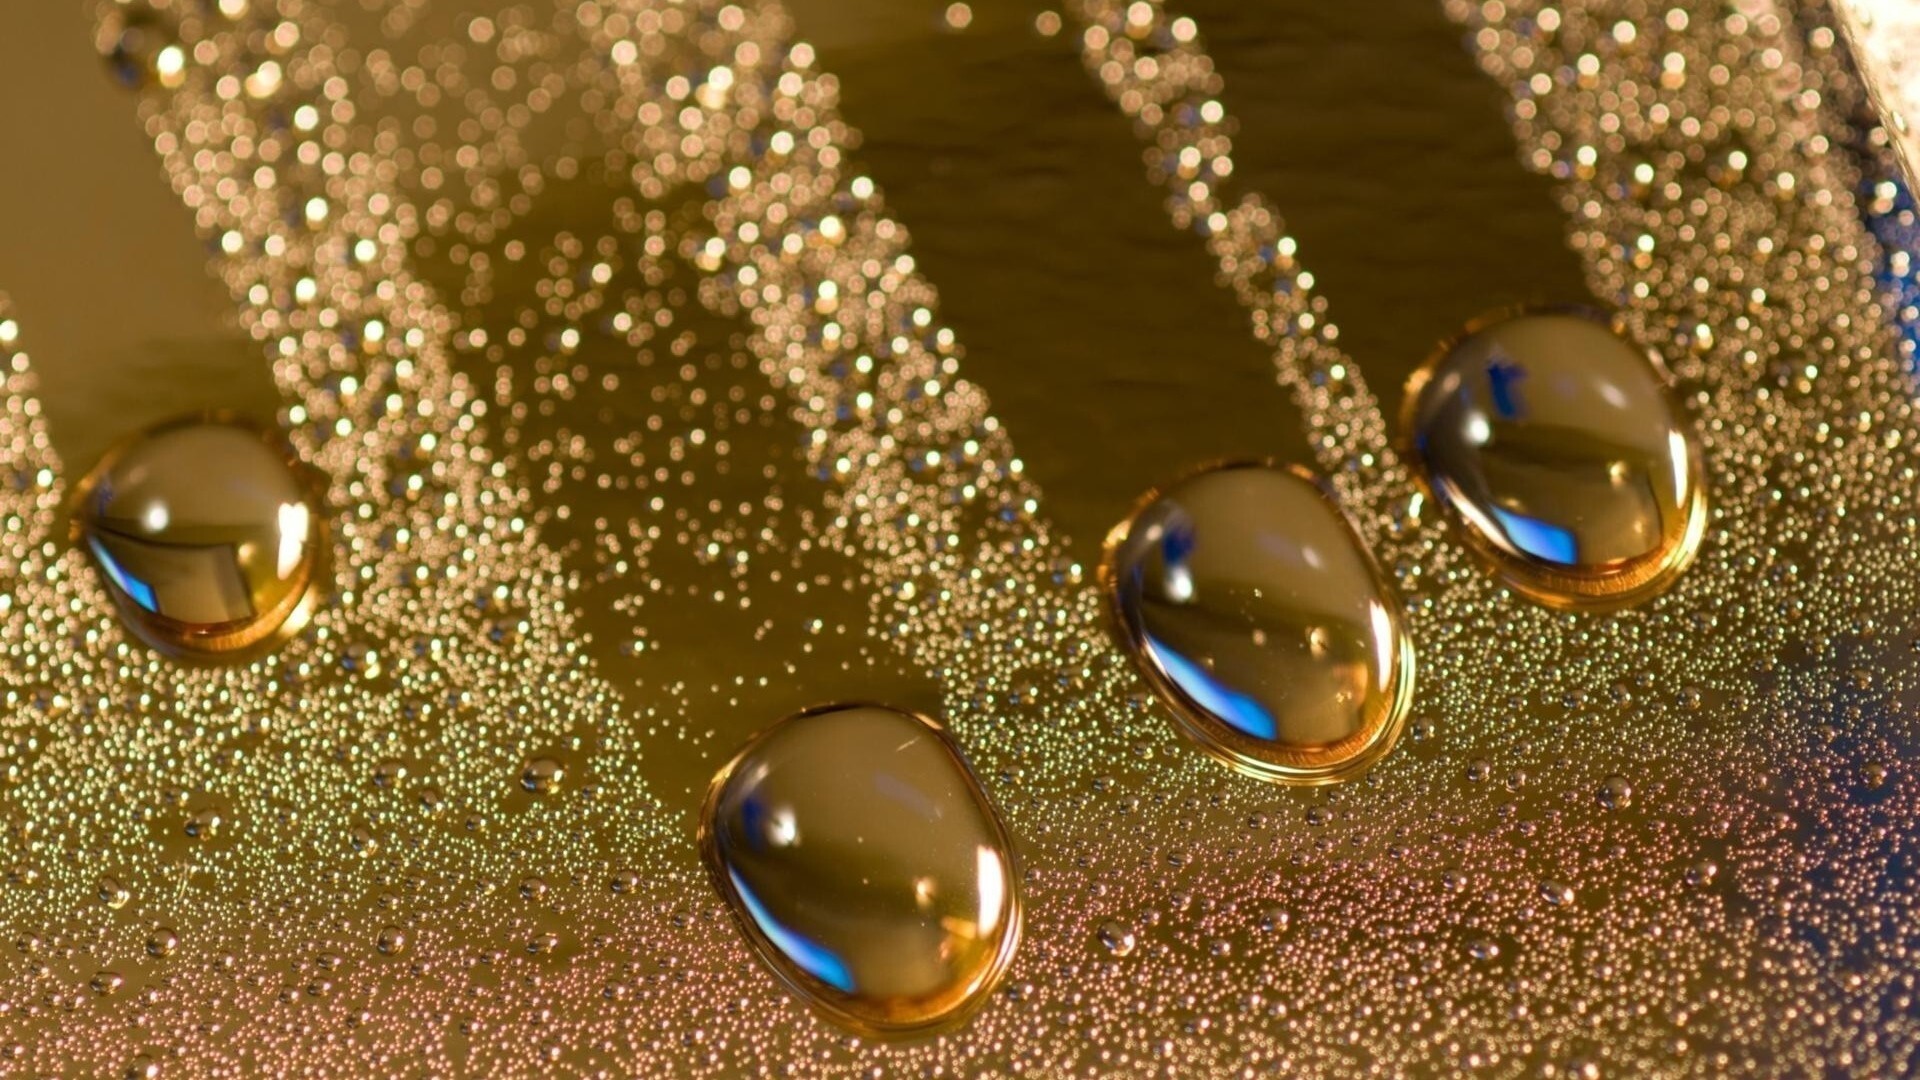 Gold Foil: Water on the gold-gilded surface, Decoration of pottery, porcelain, and glass. 1920x1080 Full HD Wallpaper.